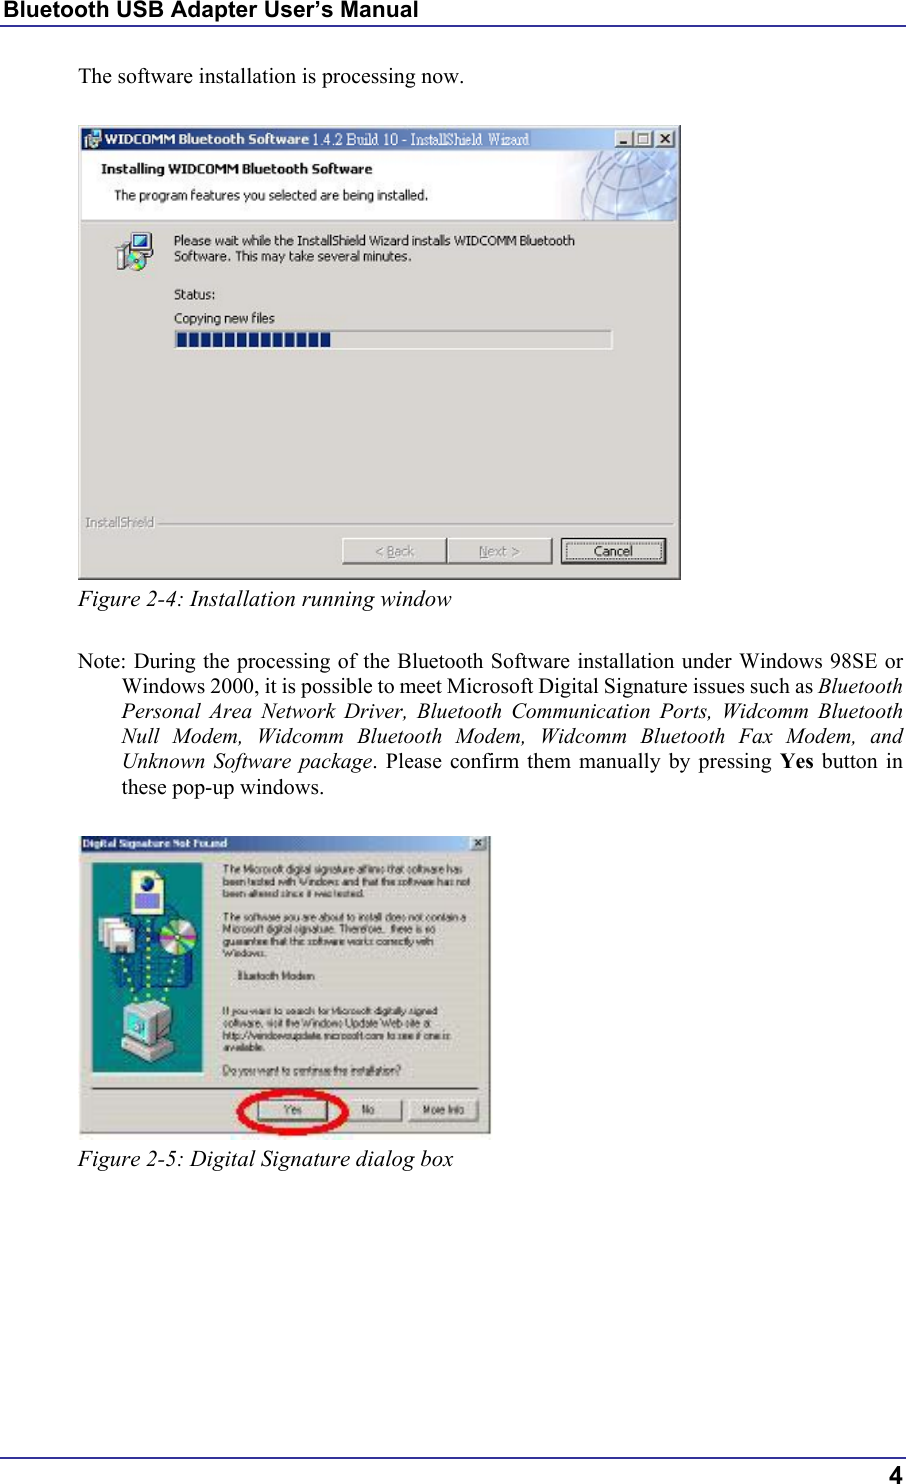 Bluetooth USB Adapter User’s Manual The software installation is processing now.   Figure 2-4: Installation running window  Note: During the processing of the Bluetooth Software installation under Windows 98SE or Windows 2000, it is possible to meet Microsoft Digital Signature issues such as Bluetooth Personal Area Network Driver, Bluetooth Communication Ports, Widcomm Bluetooth Null Modem, Widcomm Bluetooth Modem, Widcomm Bluetooth Fax Modem, and Unknown Software package. Please confirm them manually by pressing Yes button in these pop-up windows.   Figure 2-5: Digital Signature dialog box         4 